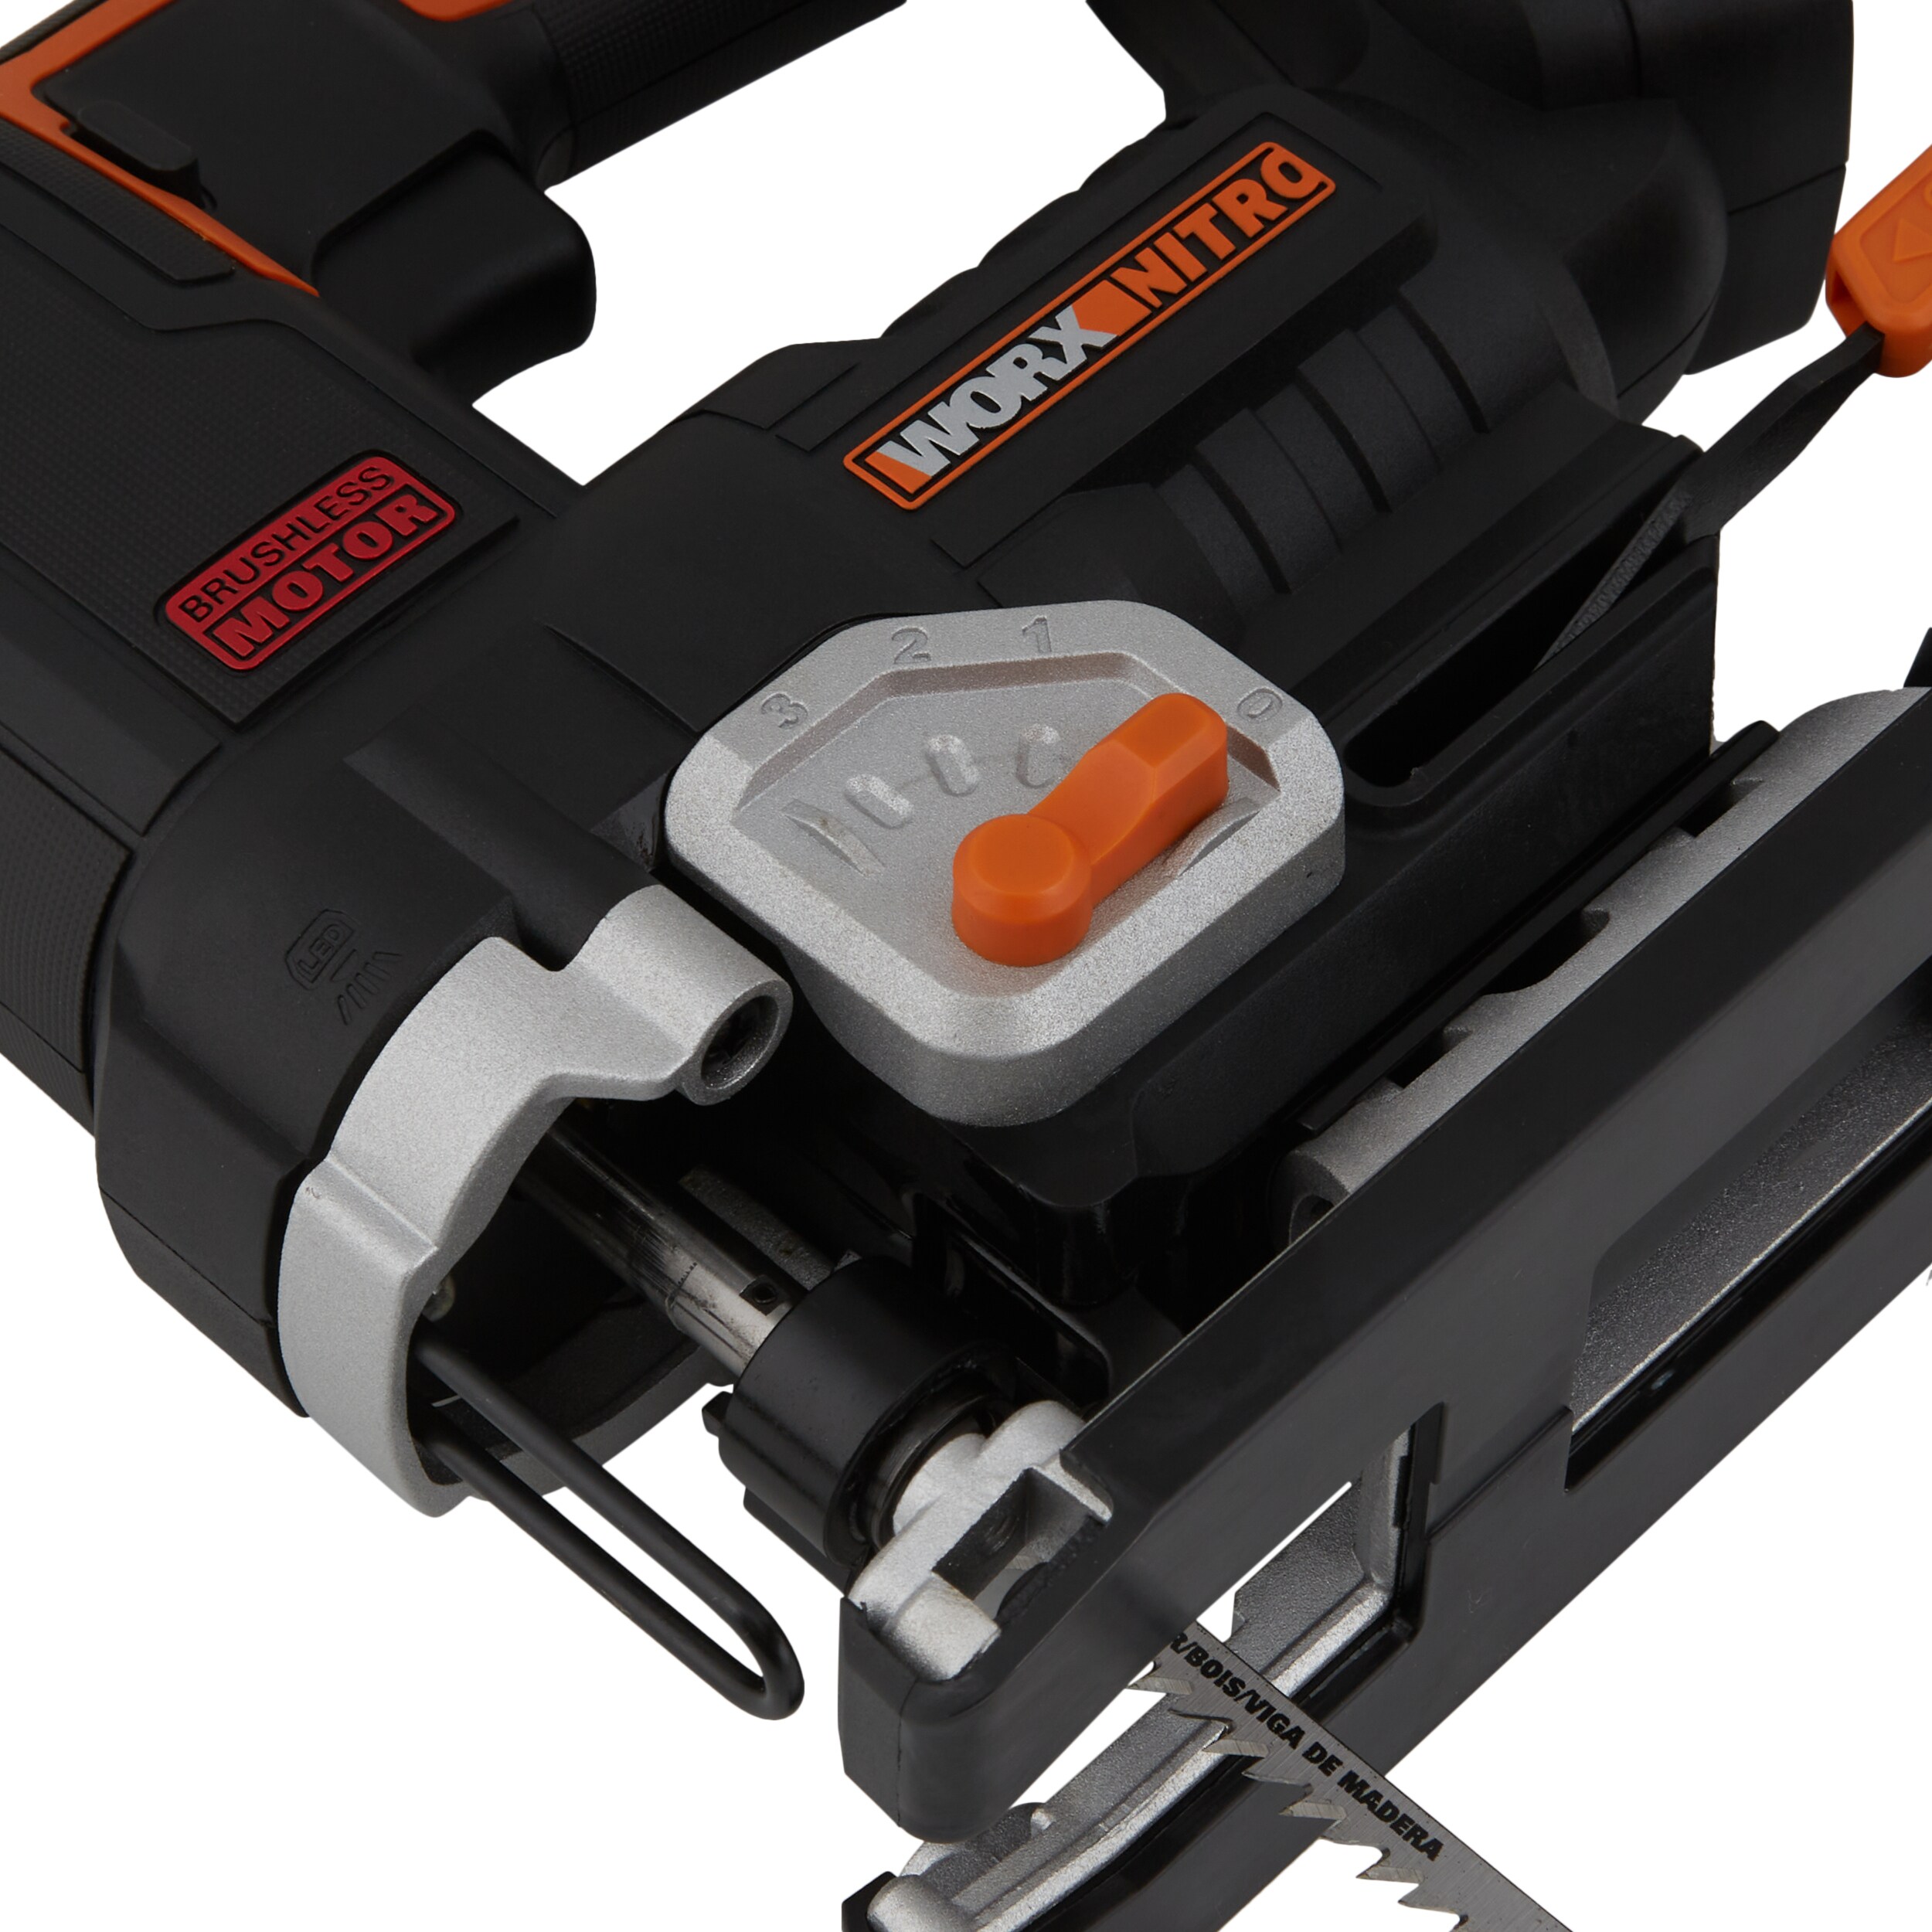 Worx Wx542l Nitro 20v Power Share Cordless Jigsaw With Brushless Motor  (battery & Charger Included) : Target